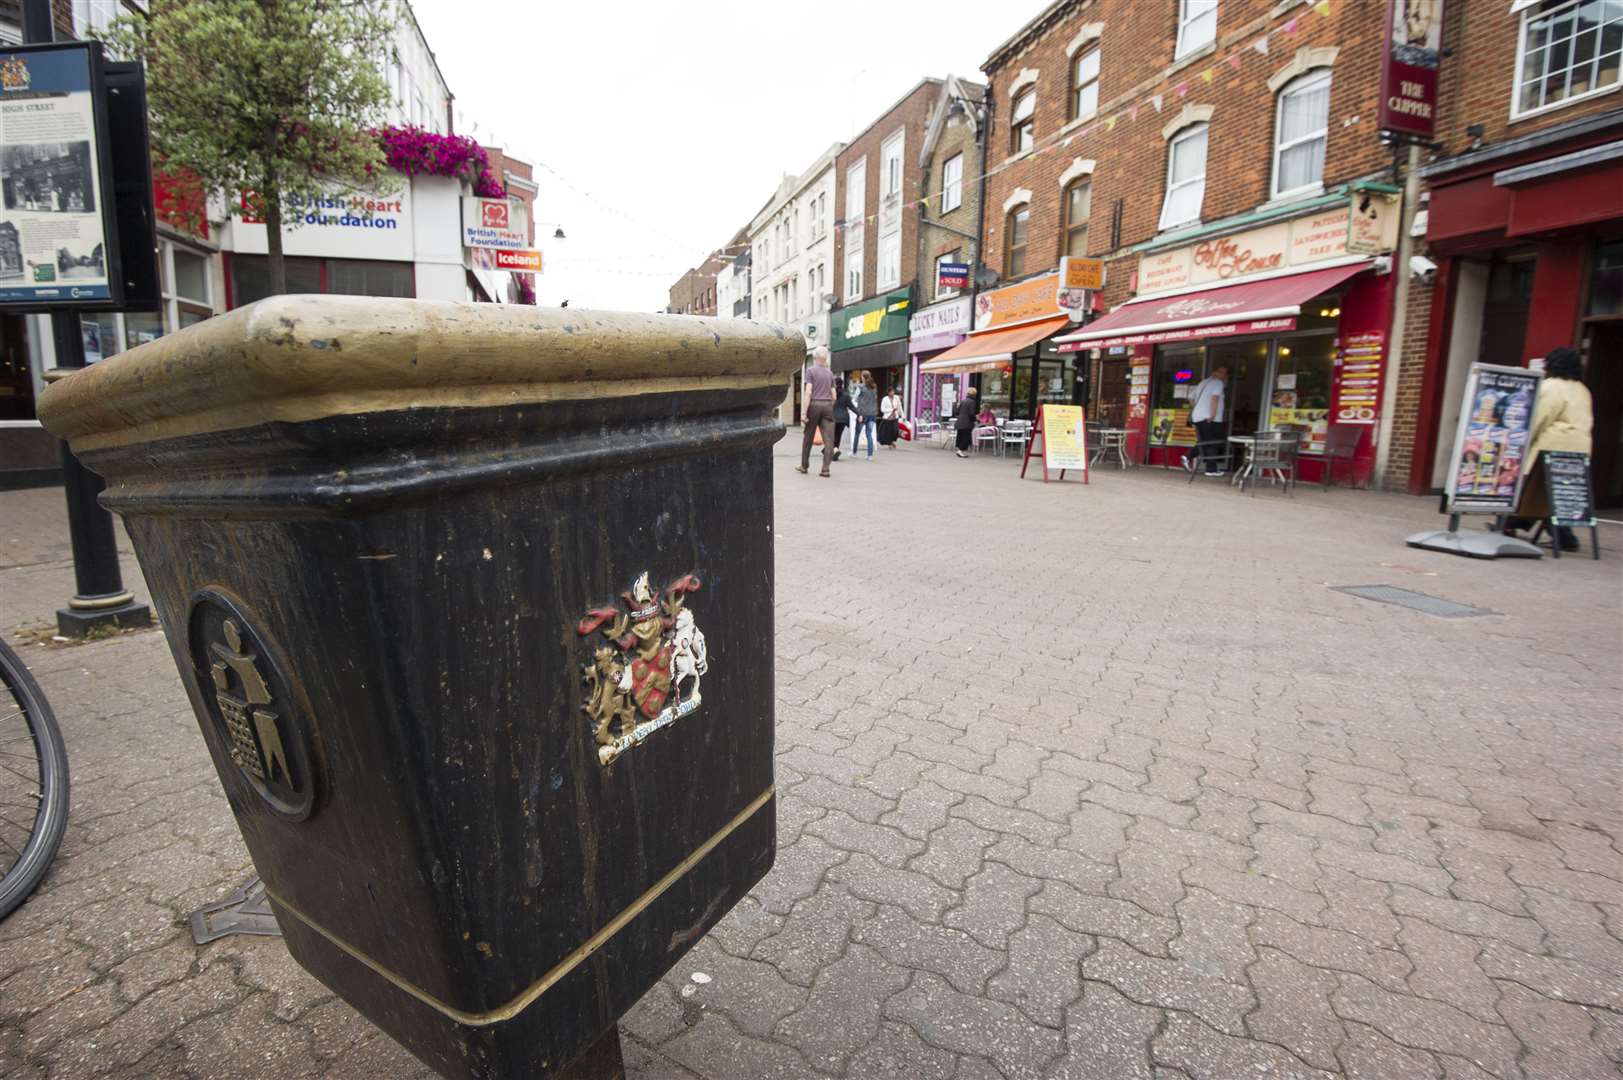 Does Dartford look much cleaner to you?